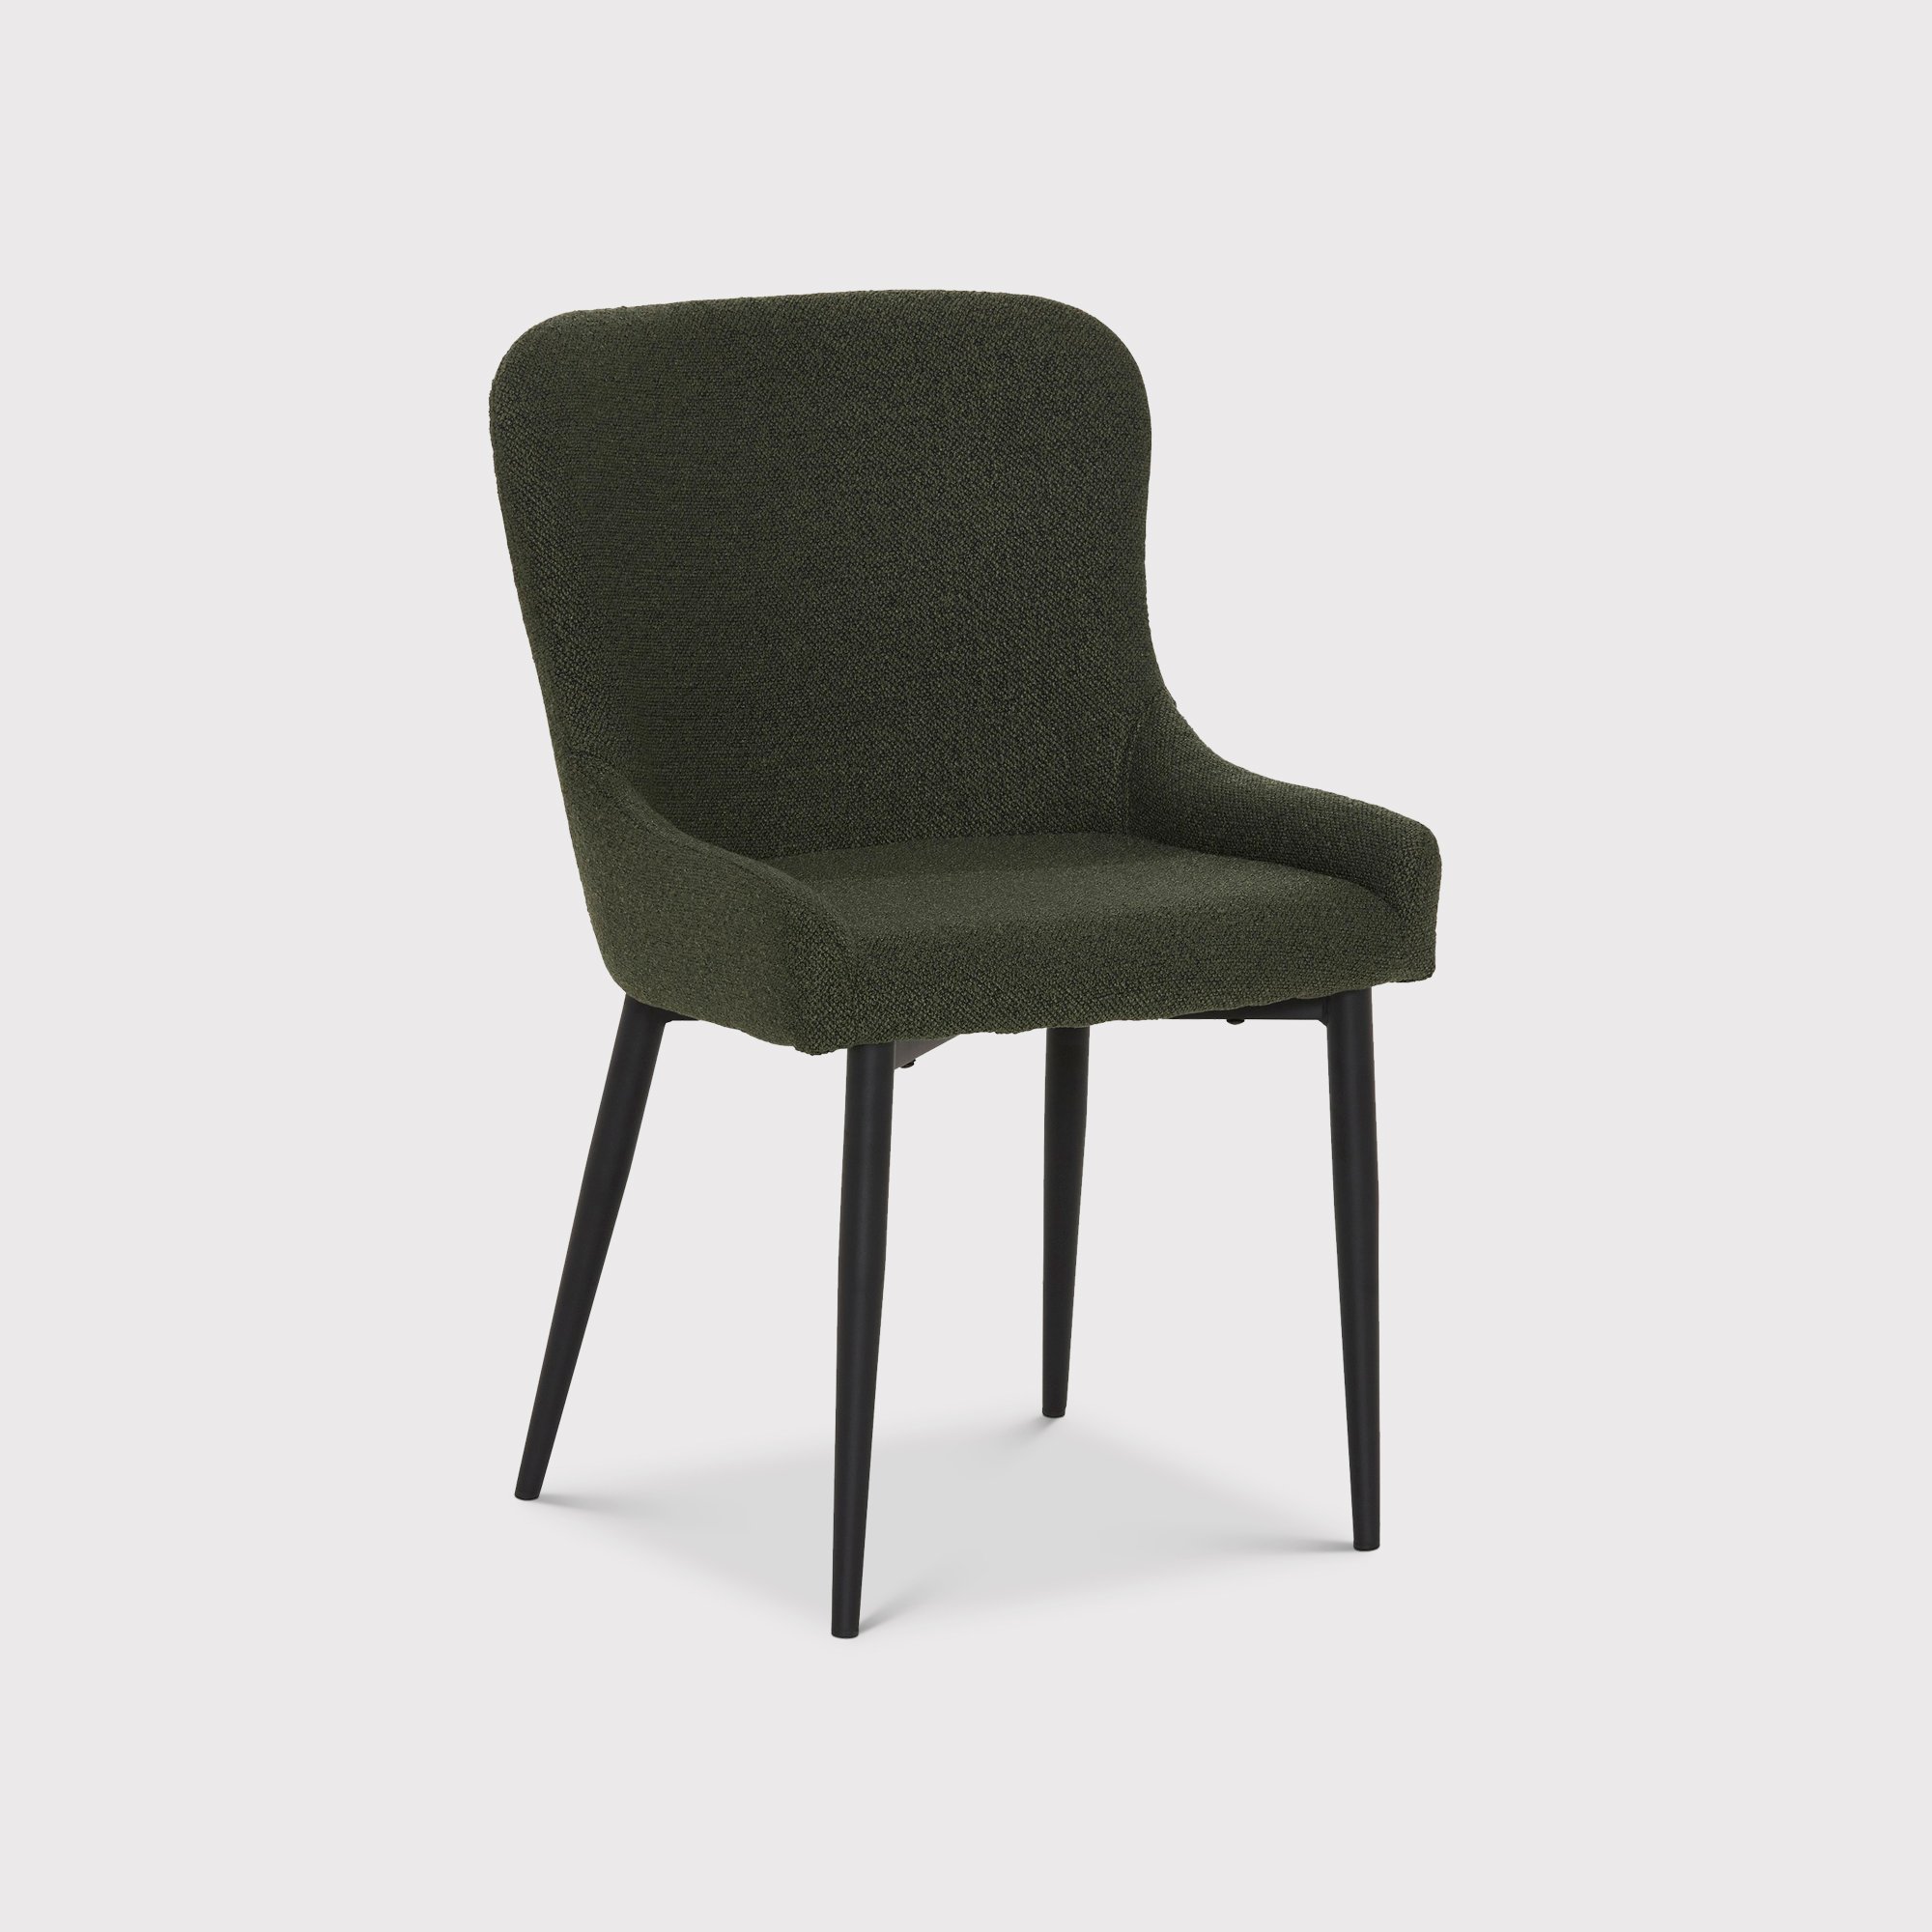 Timmins Dining Chair, Green | Barker & Stonehouse